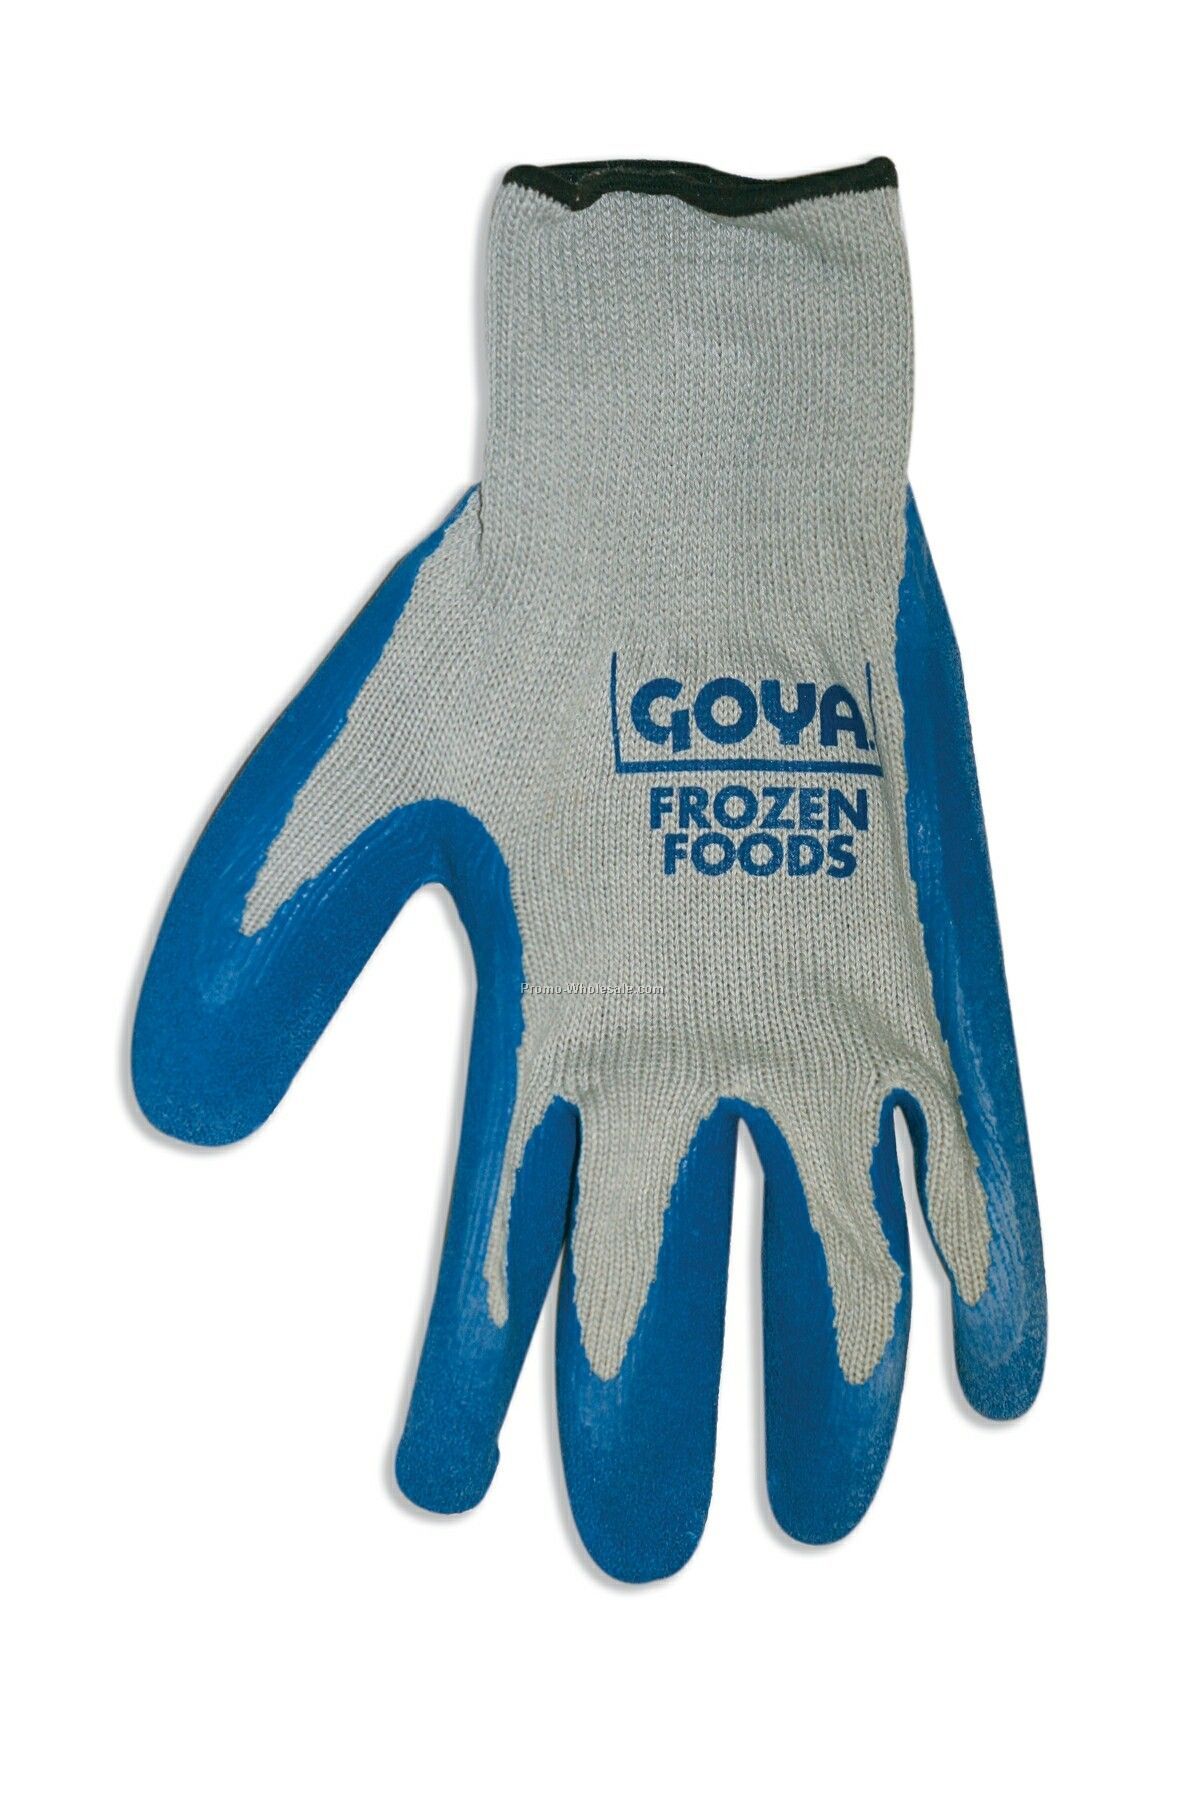 String Knit Glove With Rubber Latex Dipped Palm (S-xl)